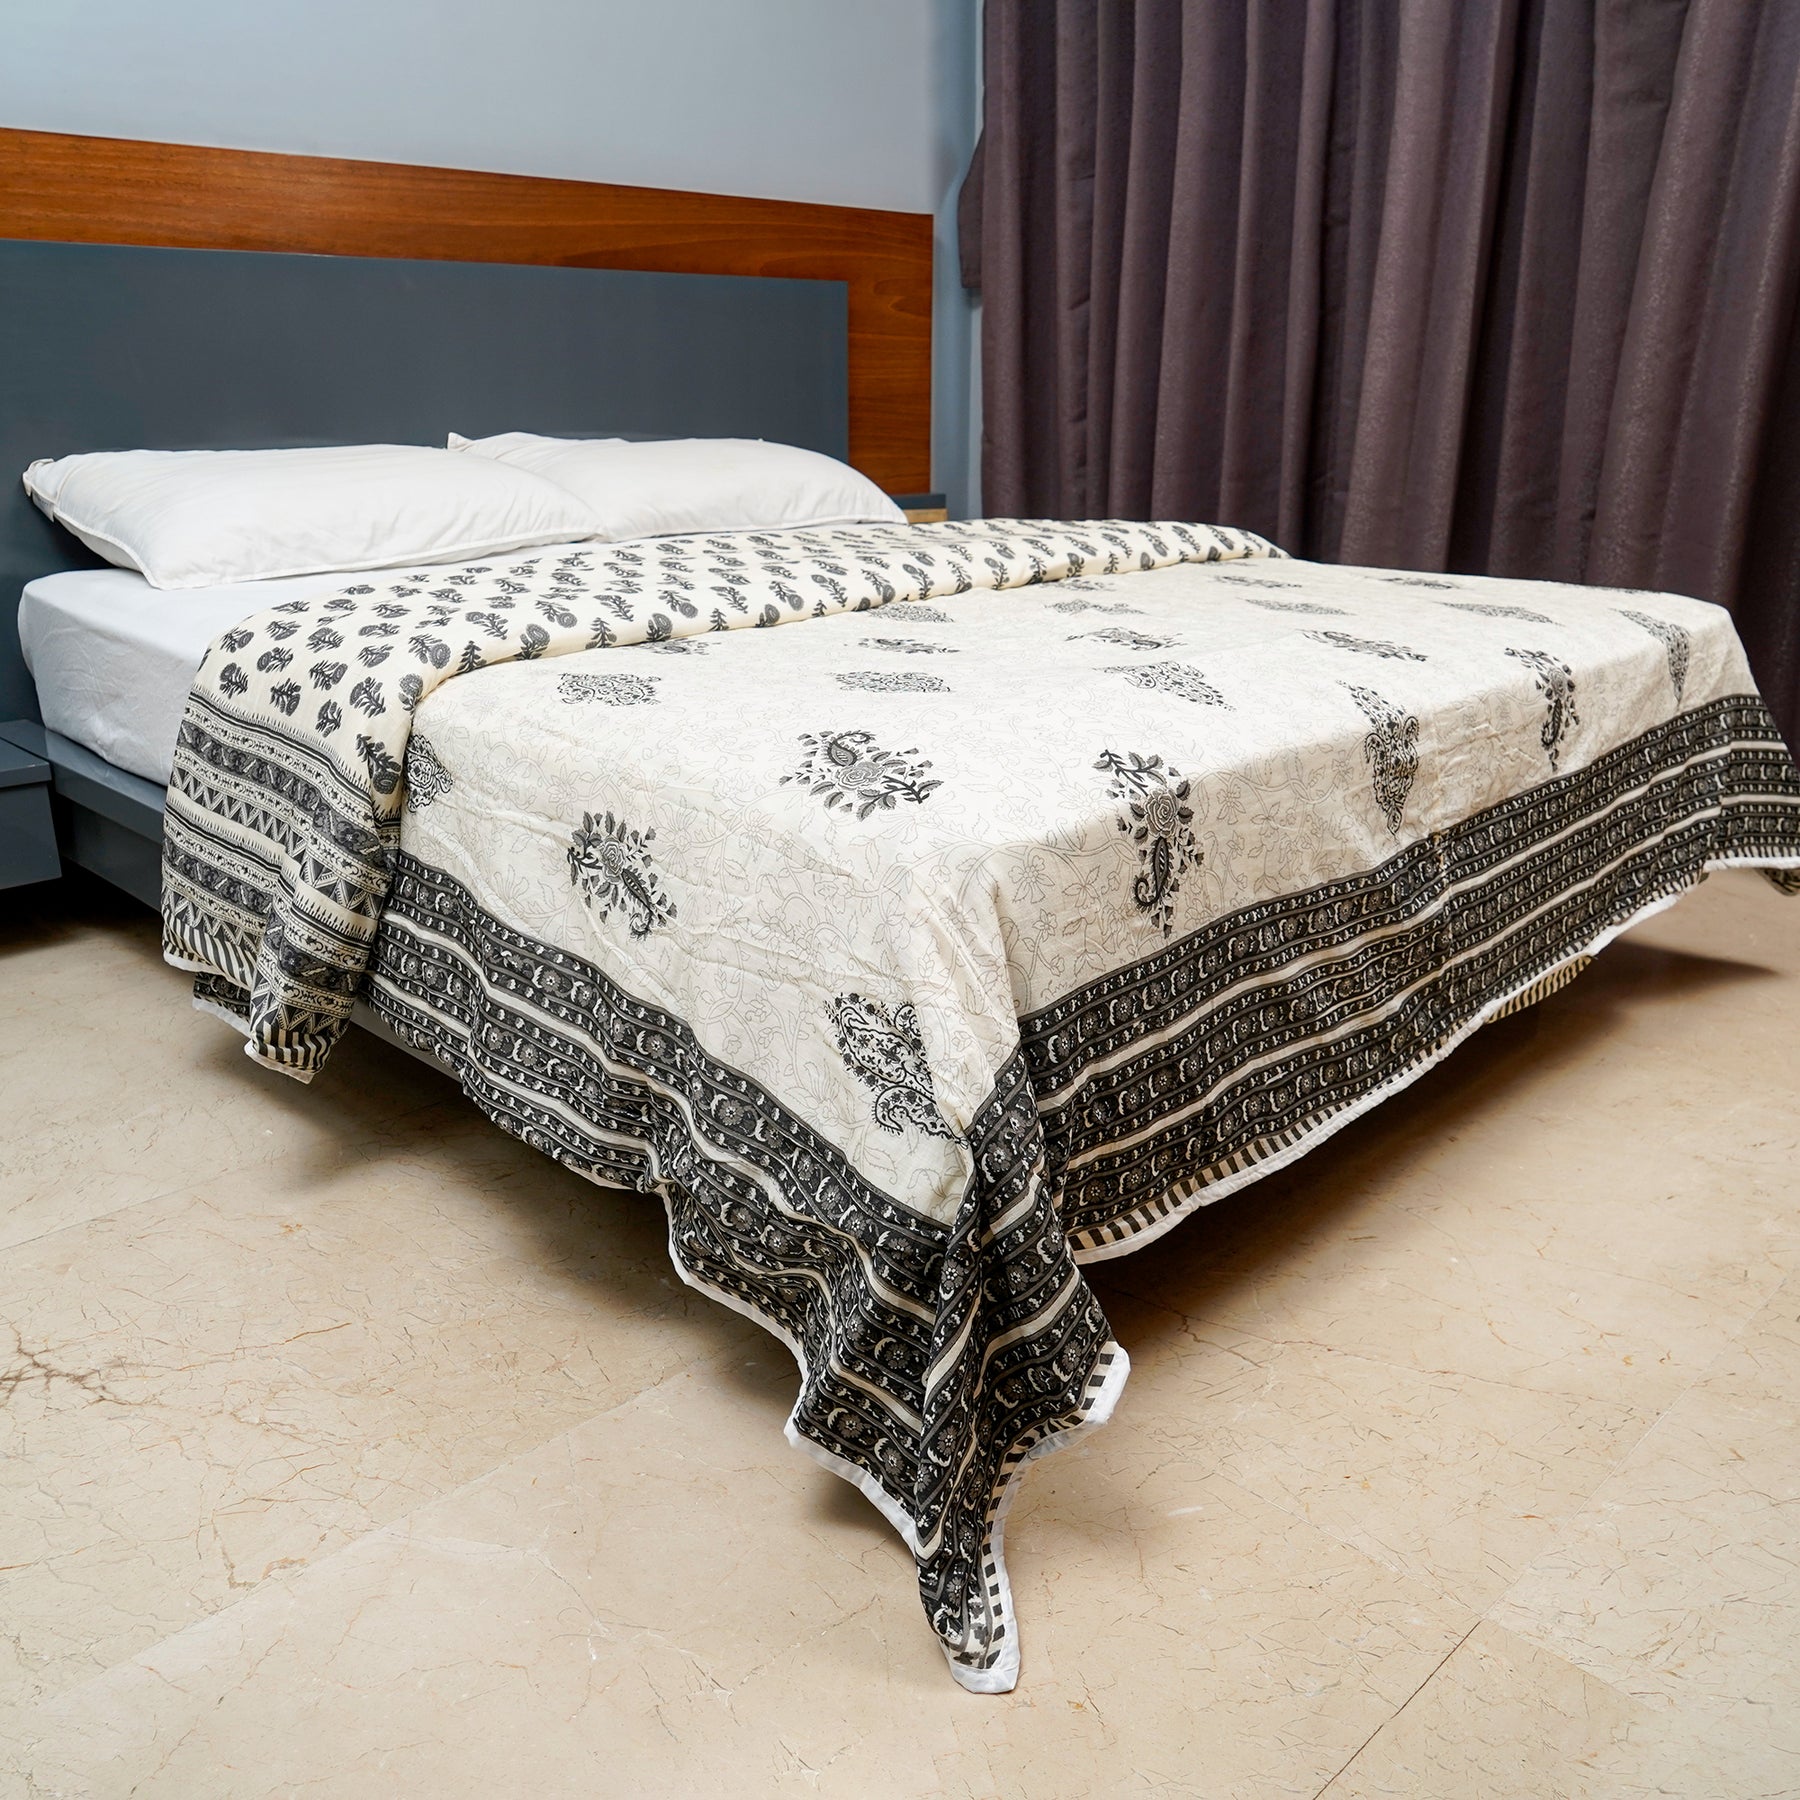 Inizio Traditional Jaipuri Floral Print Double Bed Dohar for All Season Comfort Reversible & Durable Combination of Off White and Dark Grey Soft Lightweight Blanket